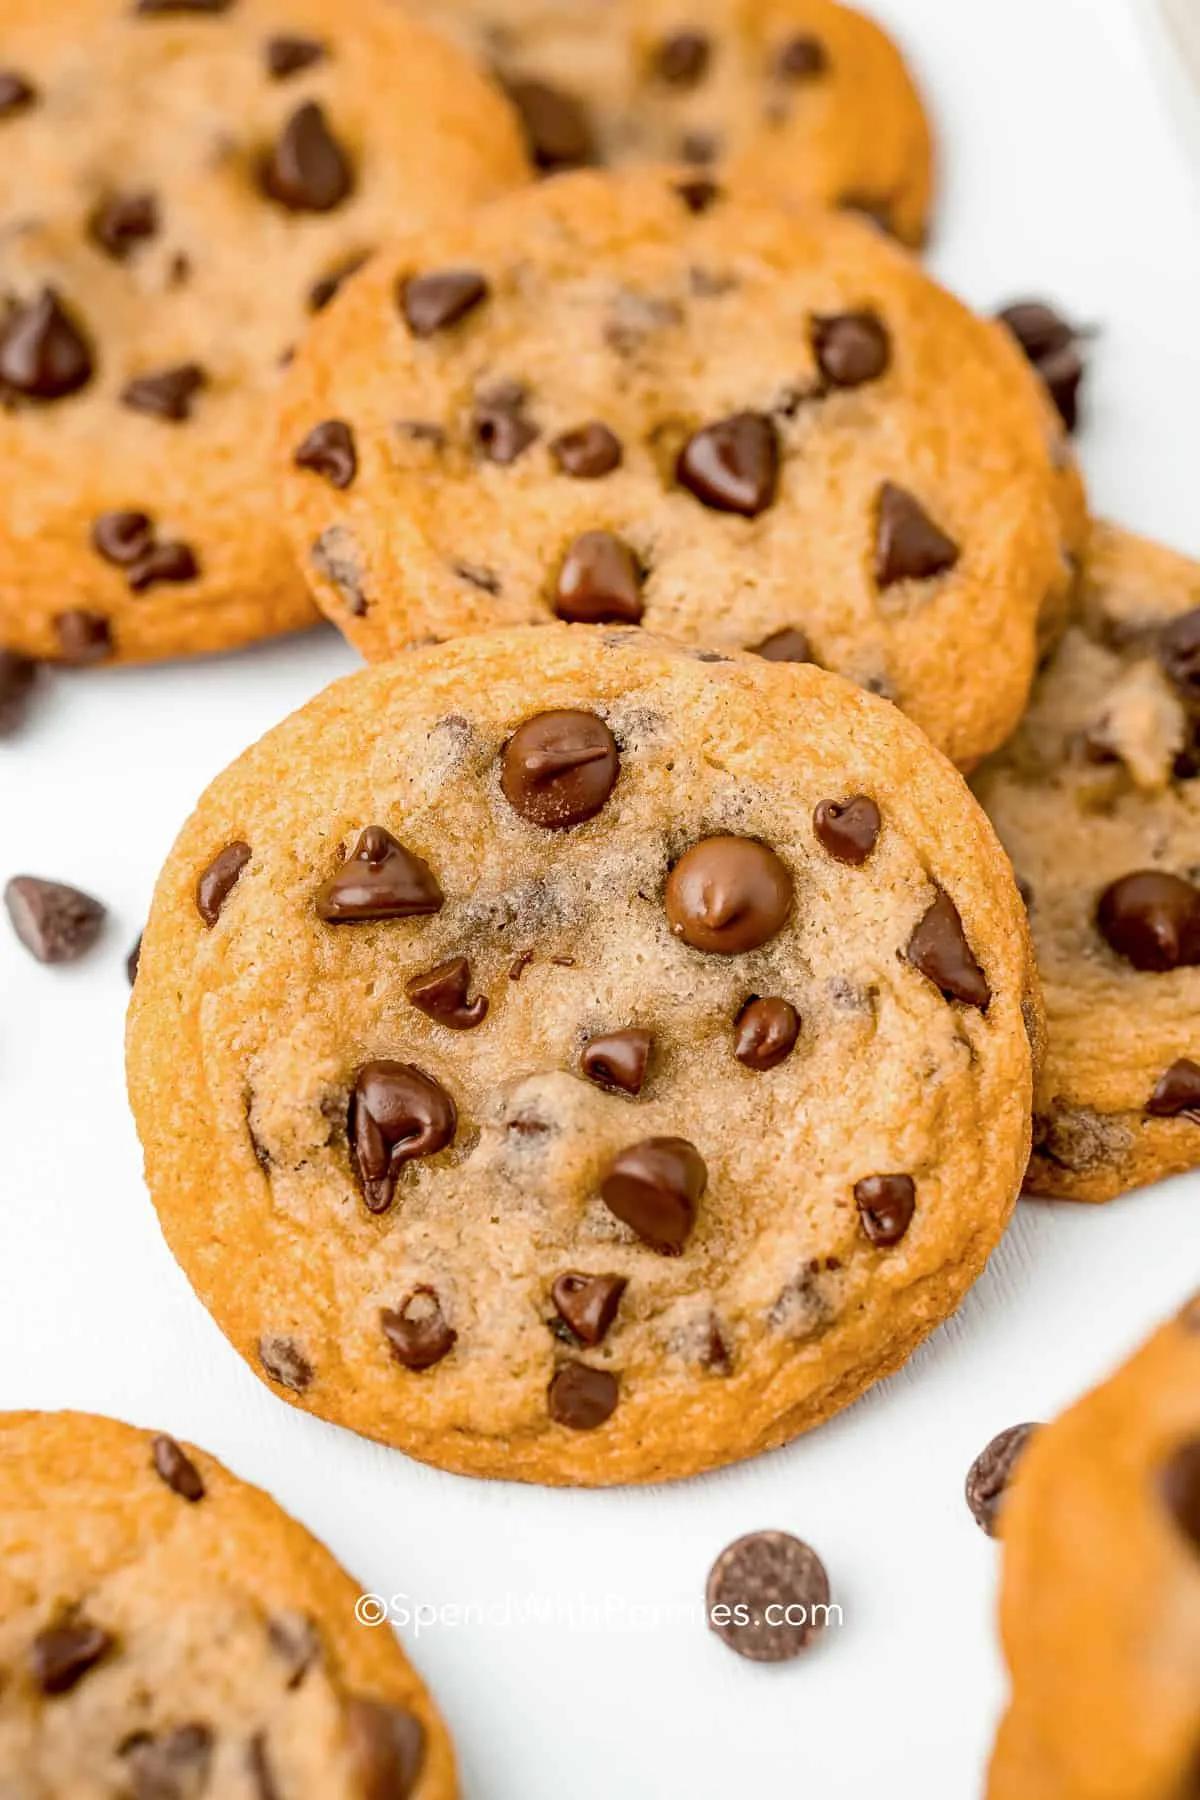 Chocolate Chip Cookies - Spend With Pennies - Vagas BH